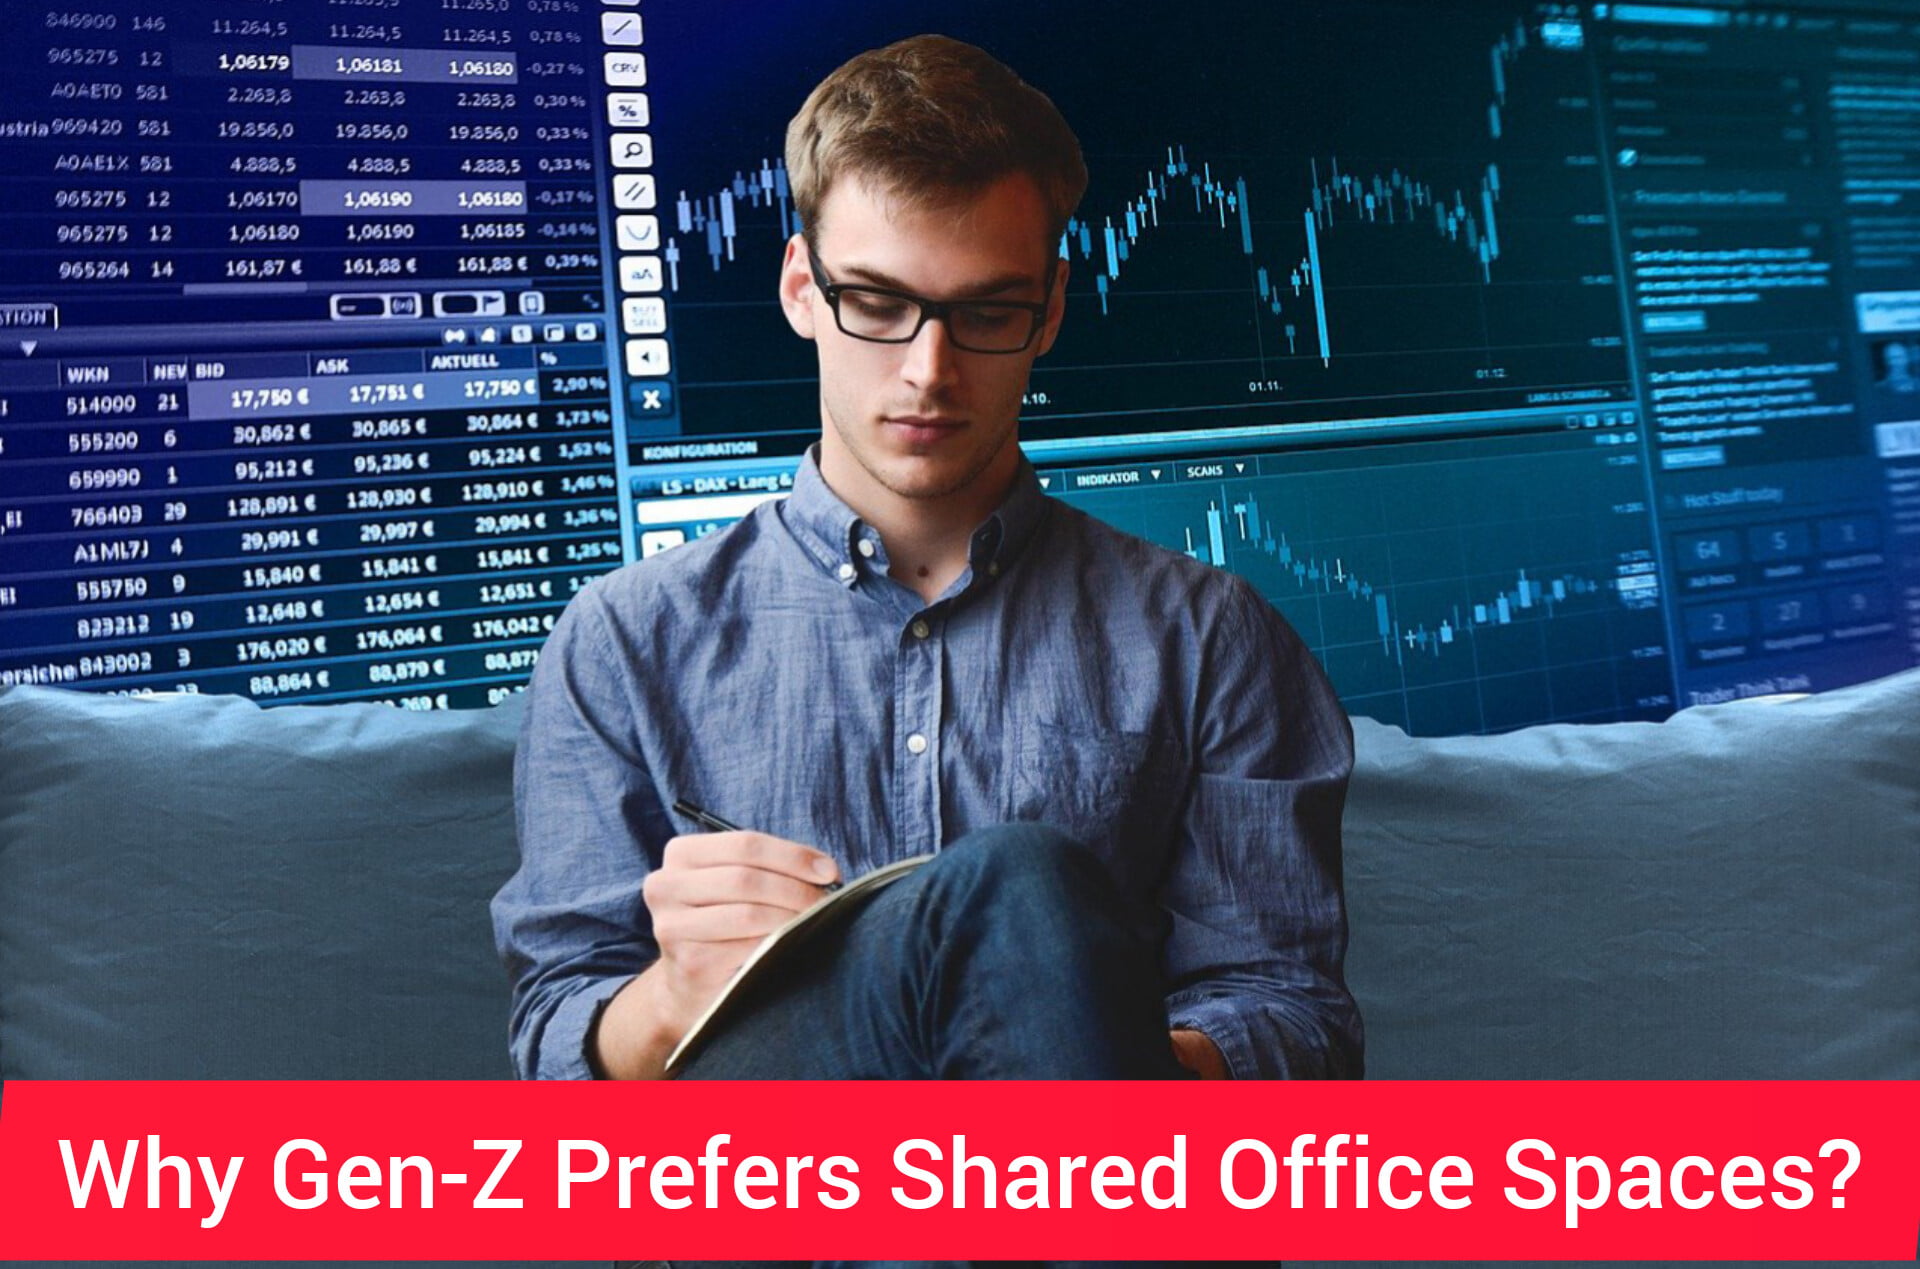 Shared Office Spaces